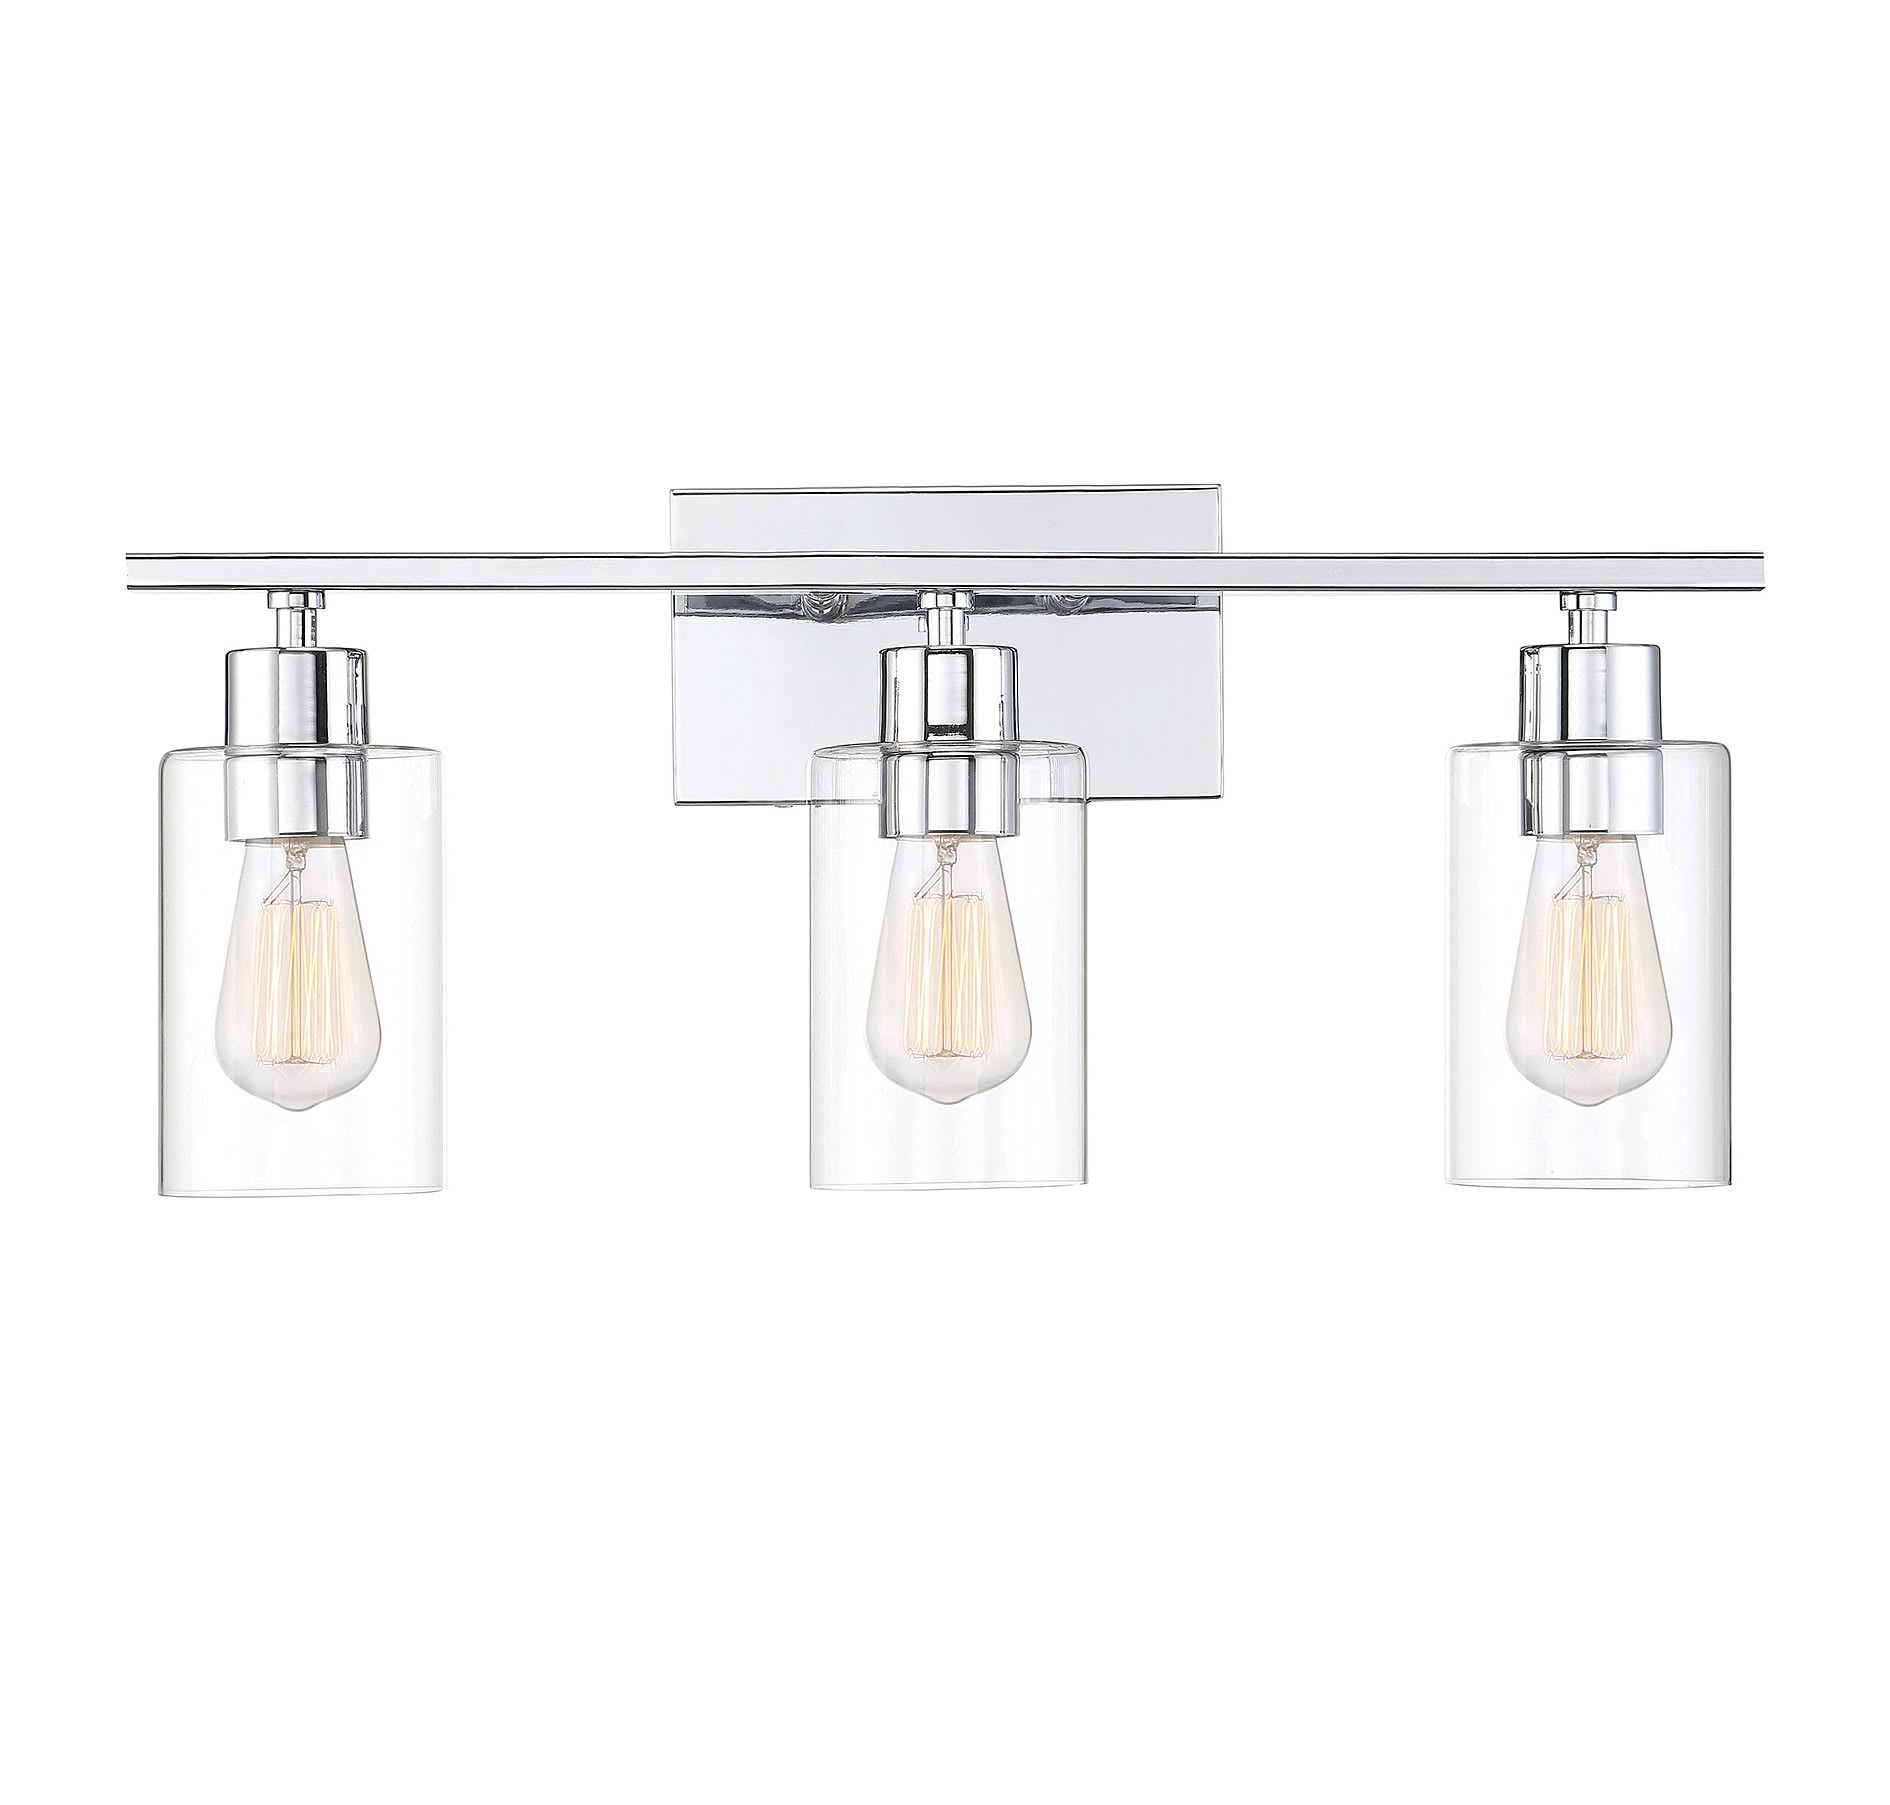 13.25 W x 9.75 H Savoy House 8-2149-2-11 Lambert 2-Light Bathroom Vanity Light in a Polished Crhome with Clear Glass 